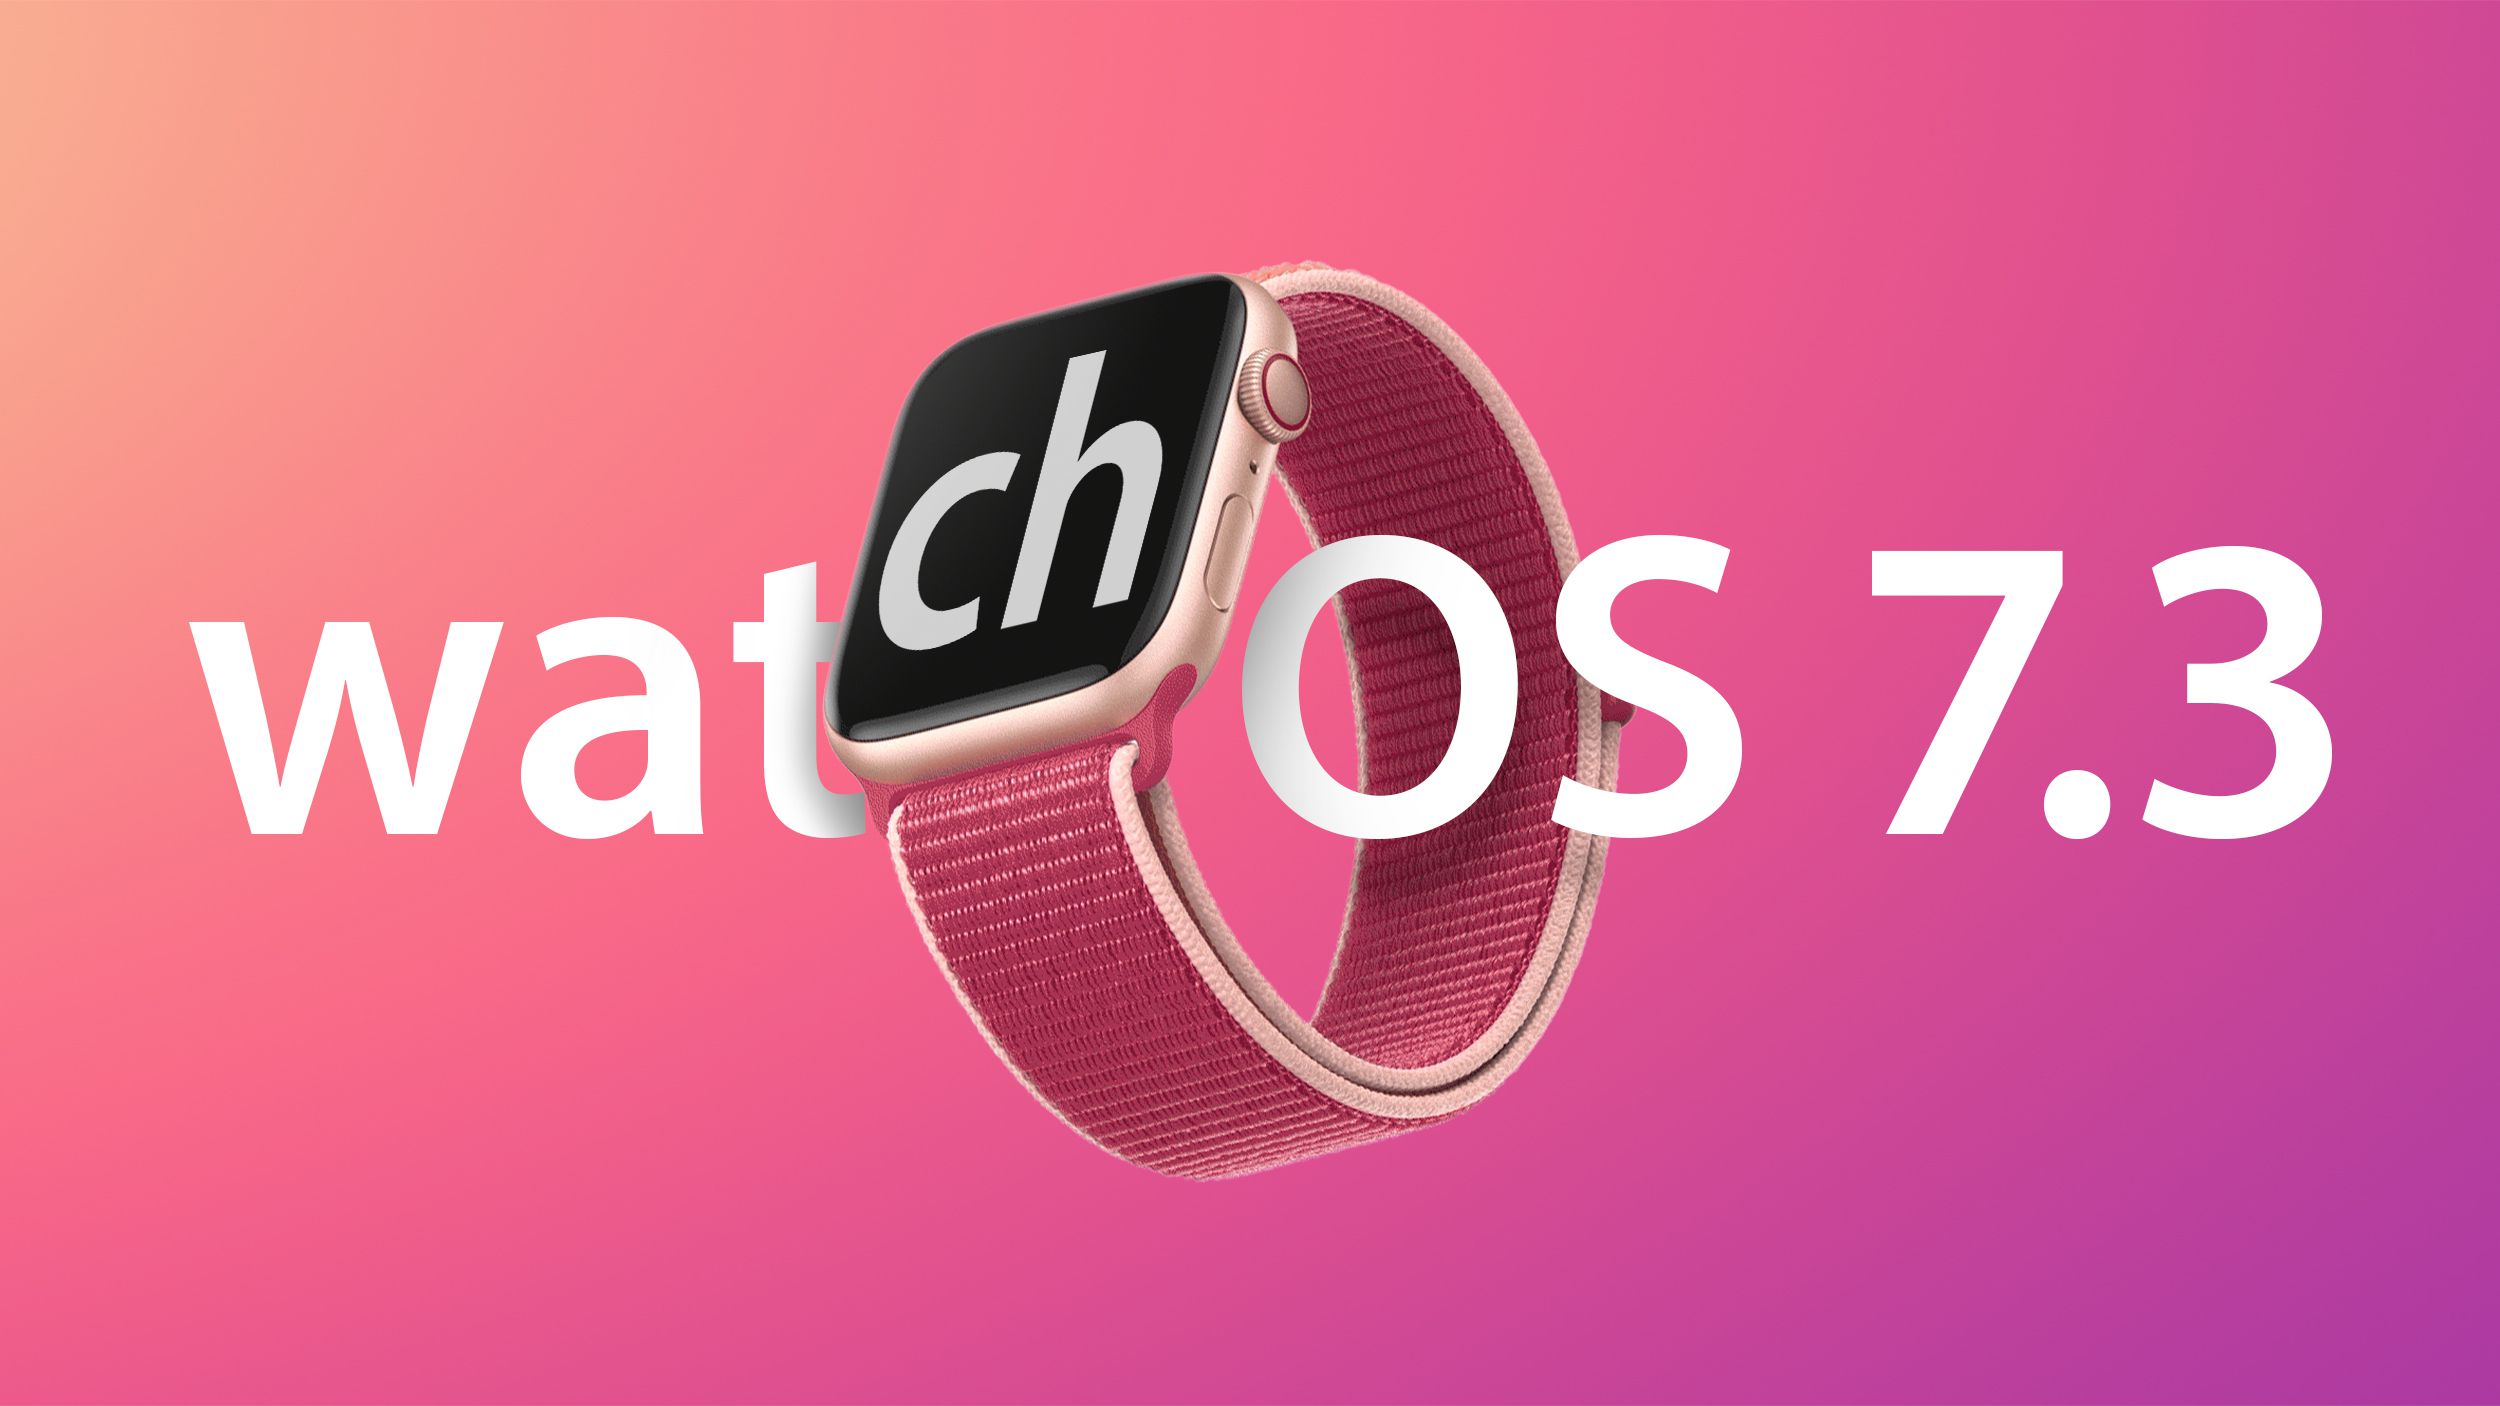 Apple Releases watchOS 7.3 With Unity Watch Face, Expanded ECG Availability and More - MacRumors